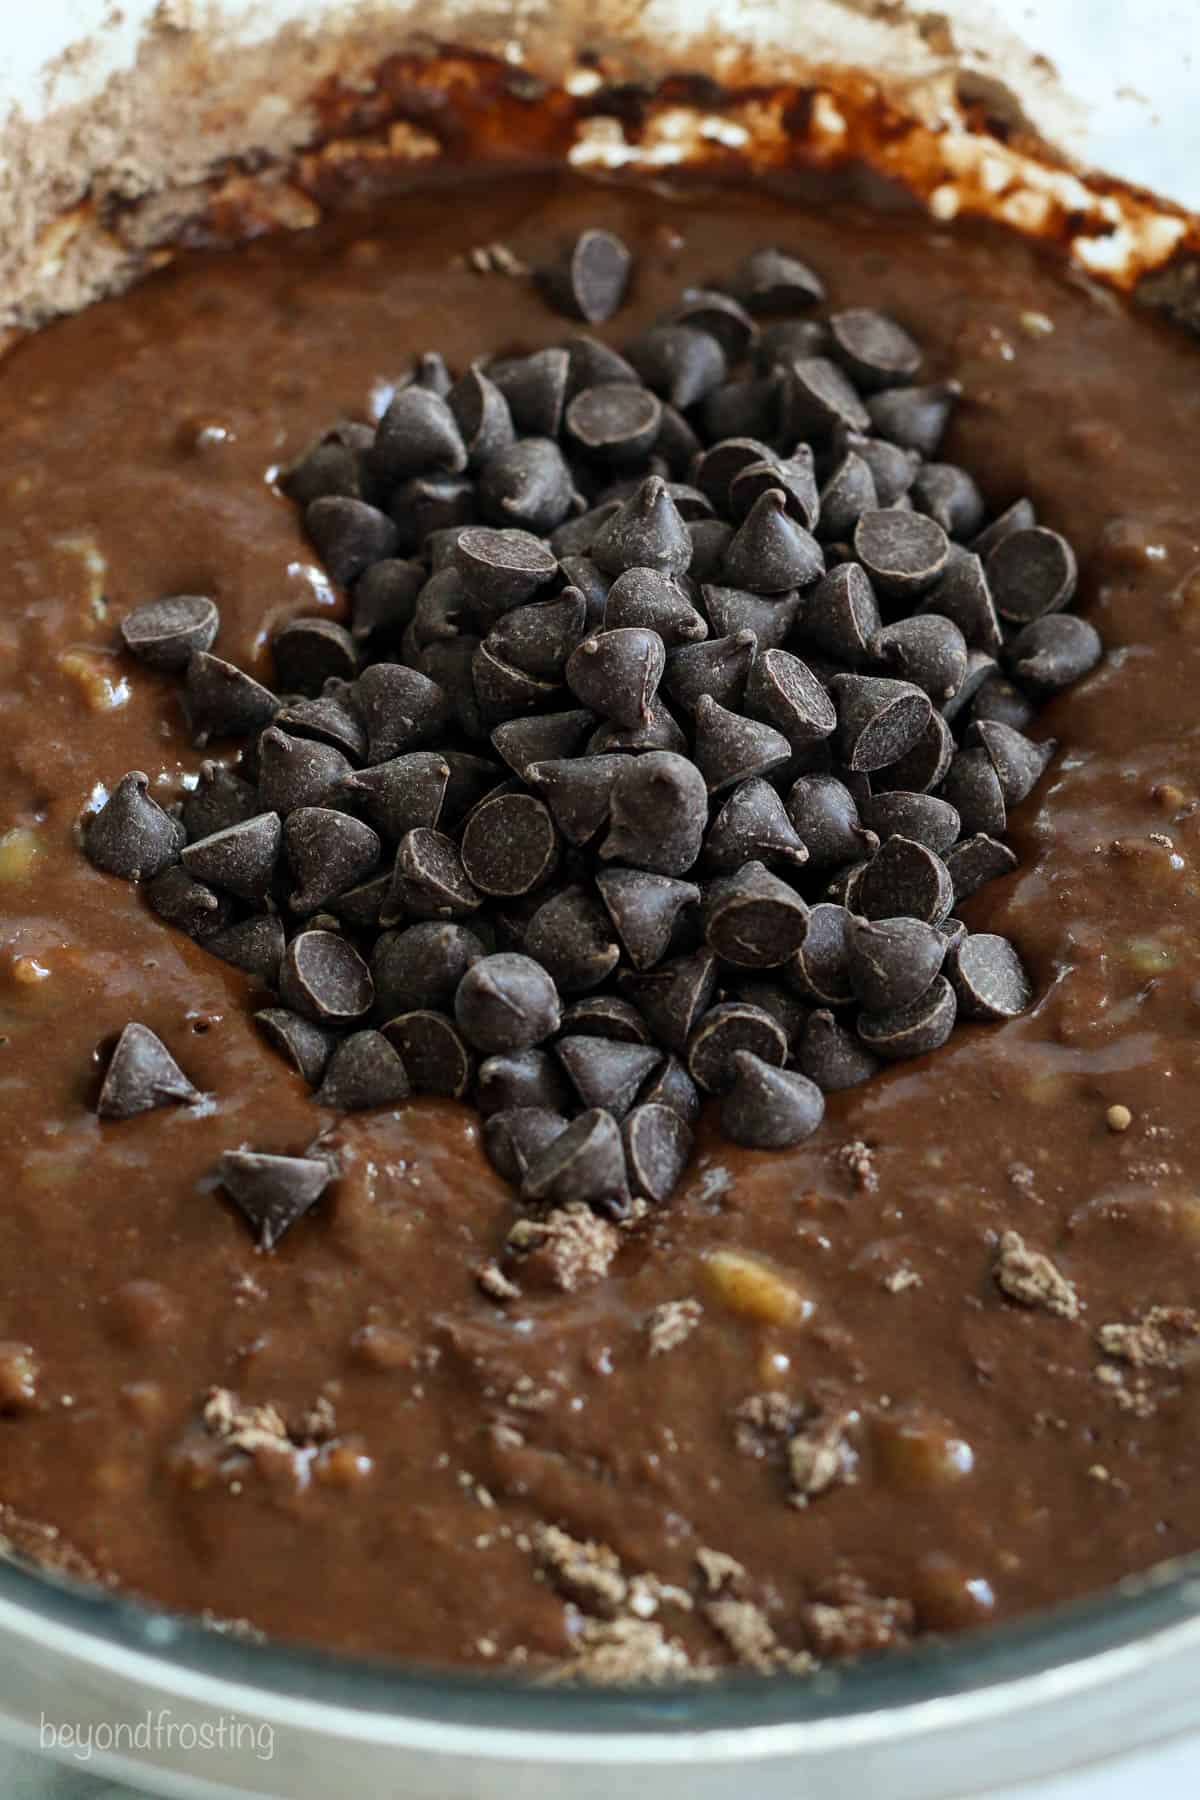 Chocolate chips added to chocolate banana bread batter